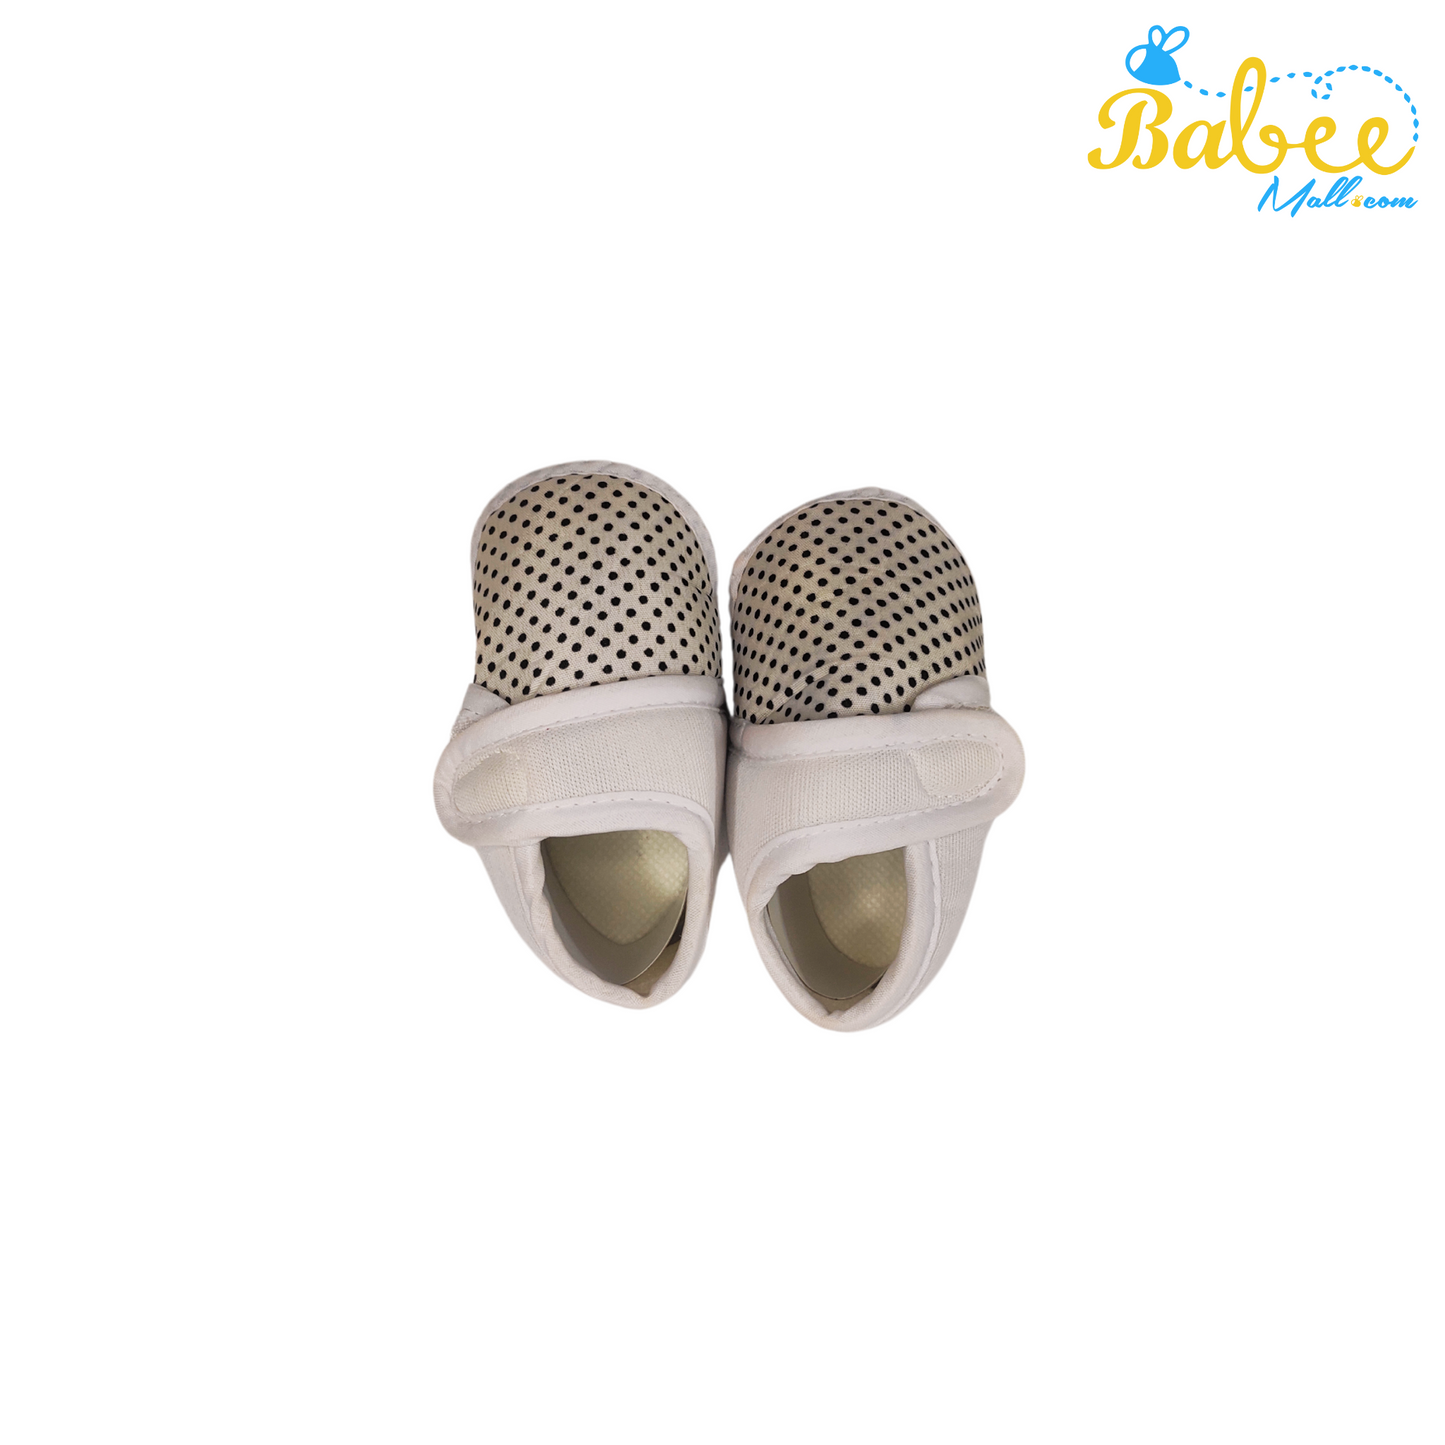 Stylish Newborn Baby Shoes - The Perfect First Steps in Style and Comfort 0-12 Month's (White)